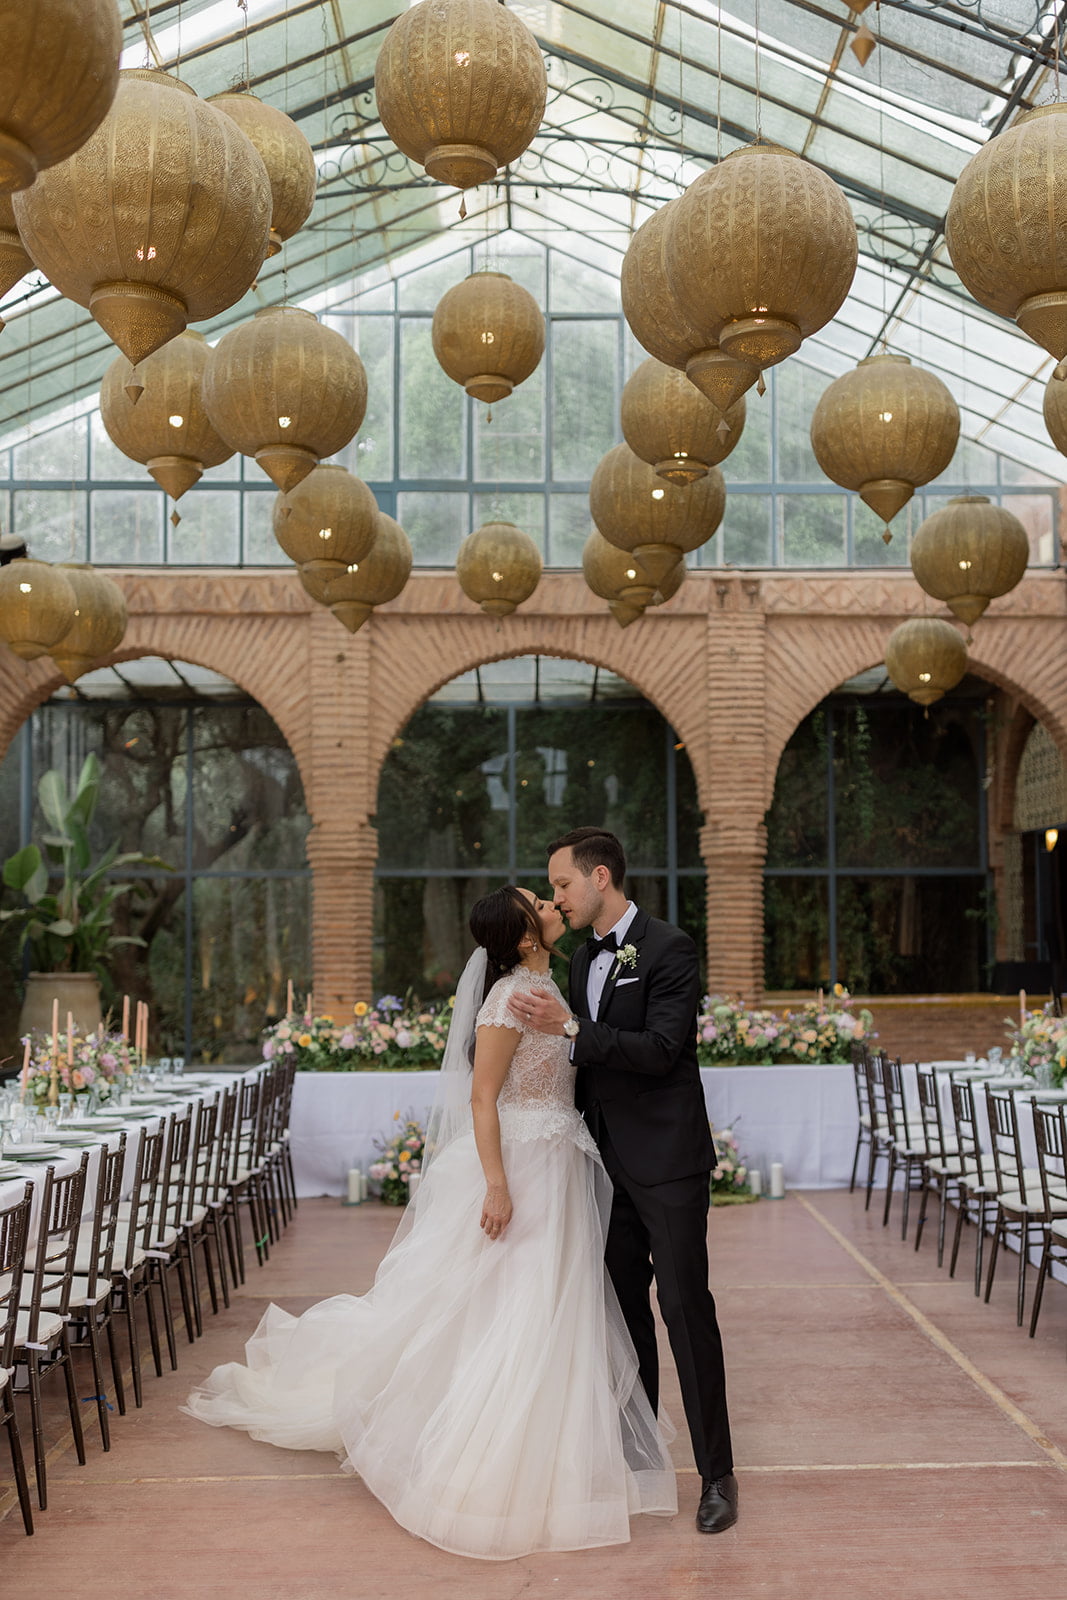 Couples portraits at a luxury wedding in Marrakech styled by wedding planners in Marrakech